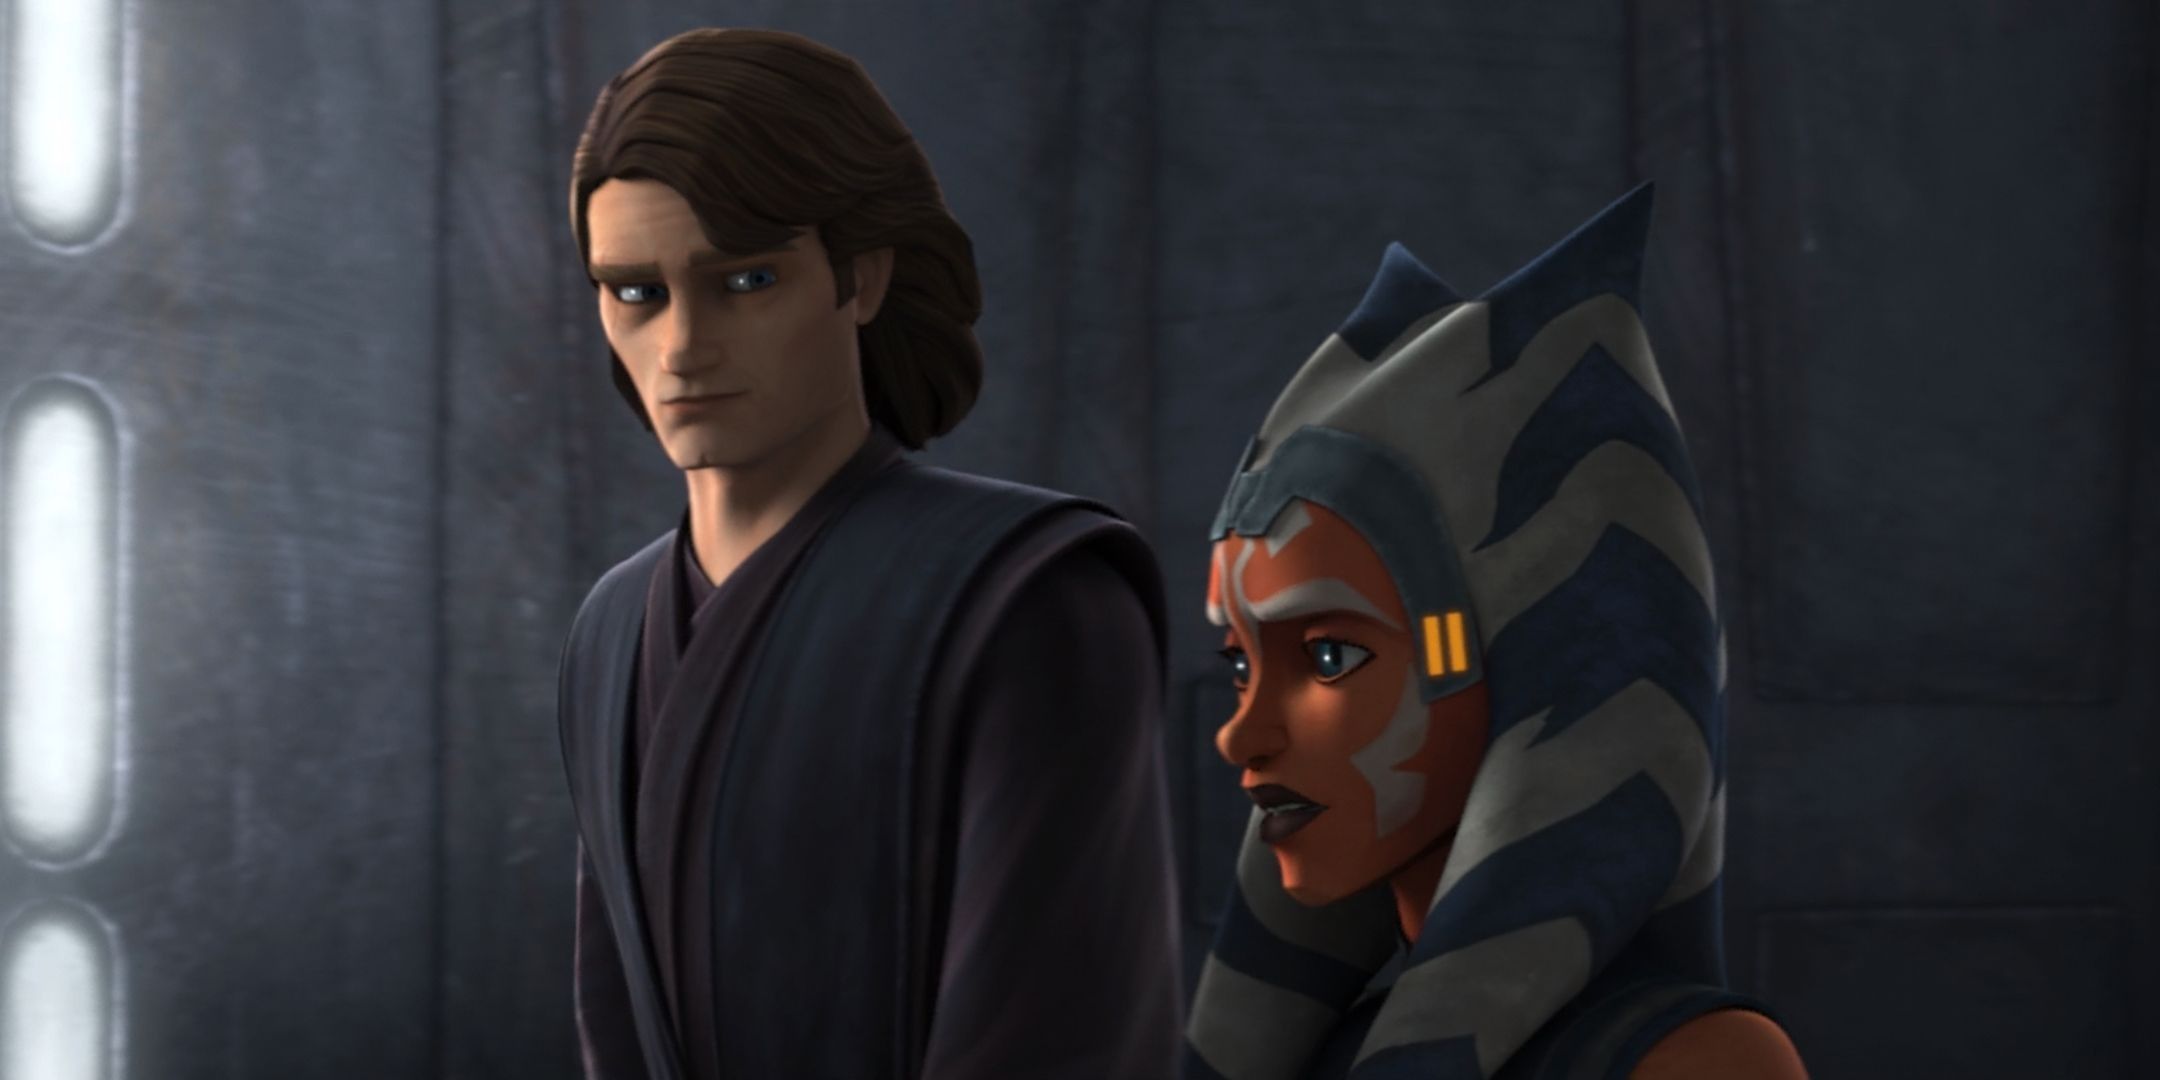 Ahsoka was the apprentice Anakin cared for the most in Star Wars